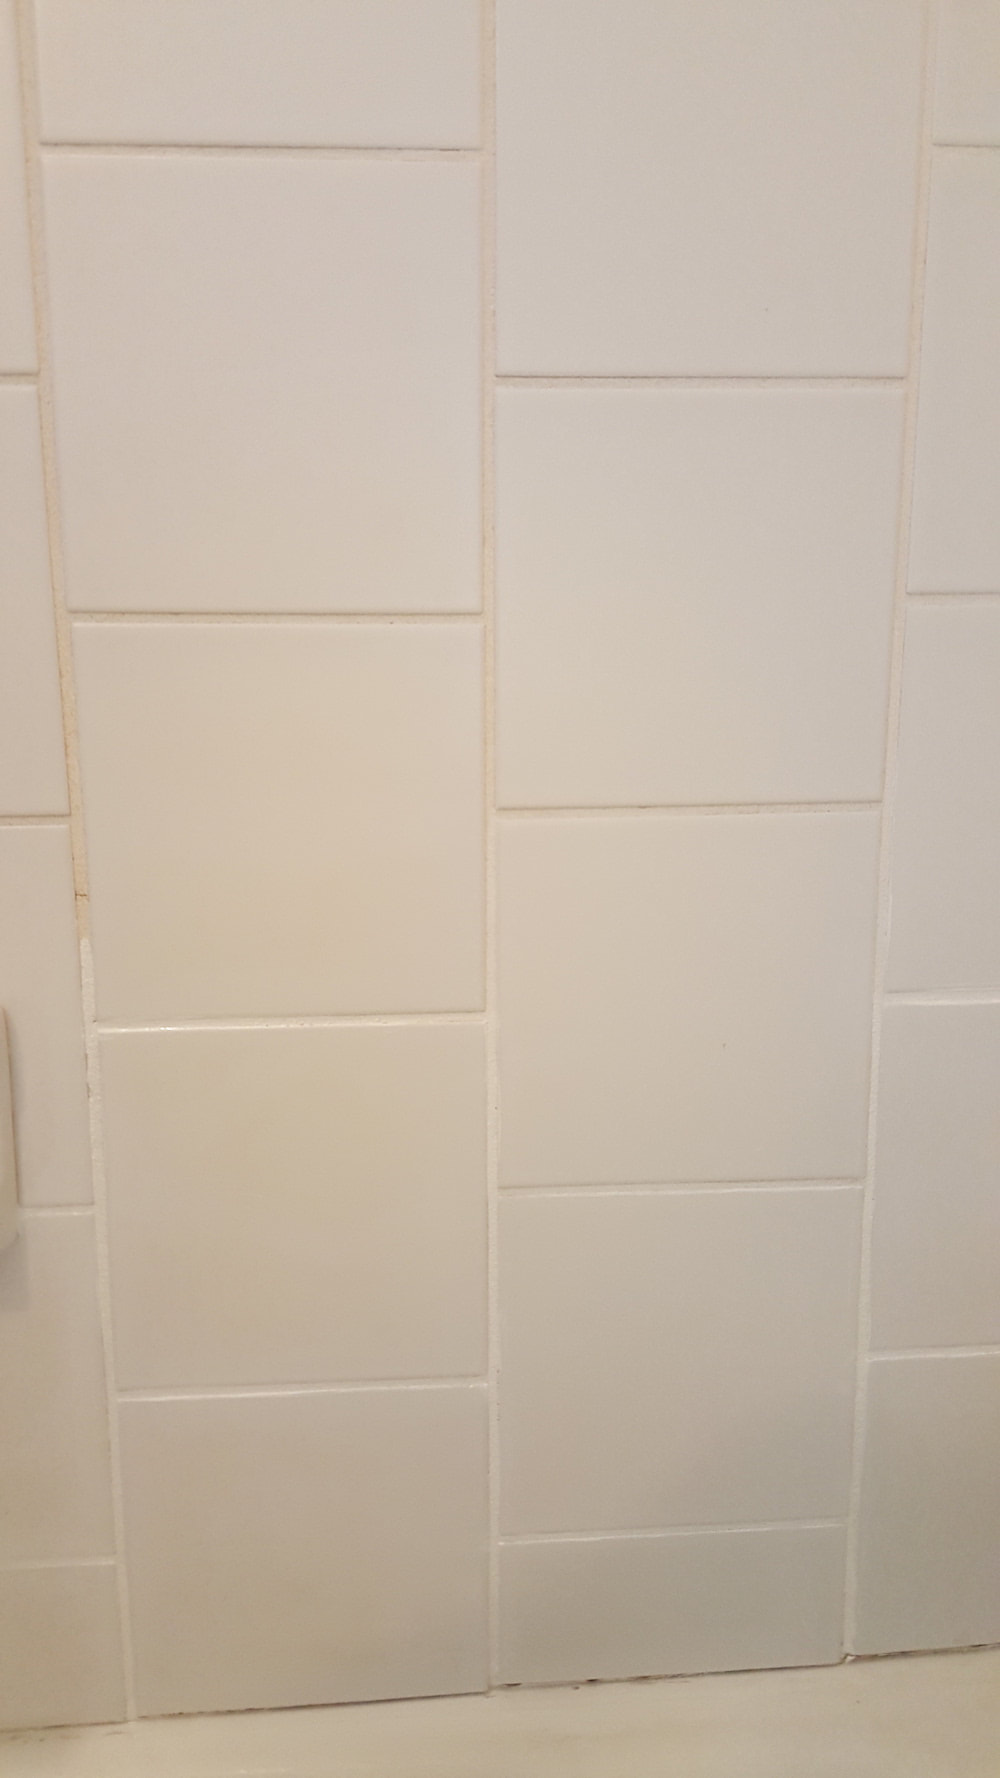 How to get ride of old worn-out grout? Call Encore Resurfacing, we will grint out the old grout, and regrout and recaulk your tiles and tub and kitchen